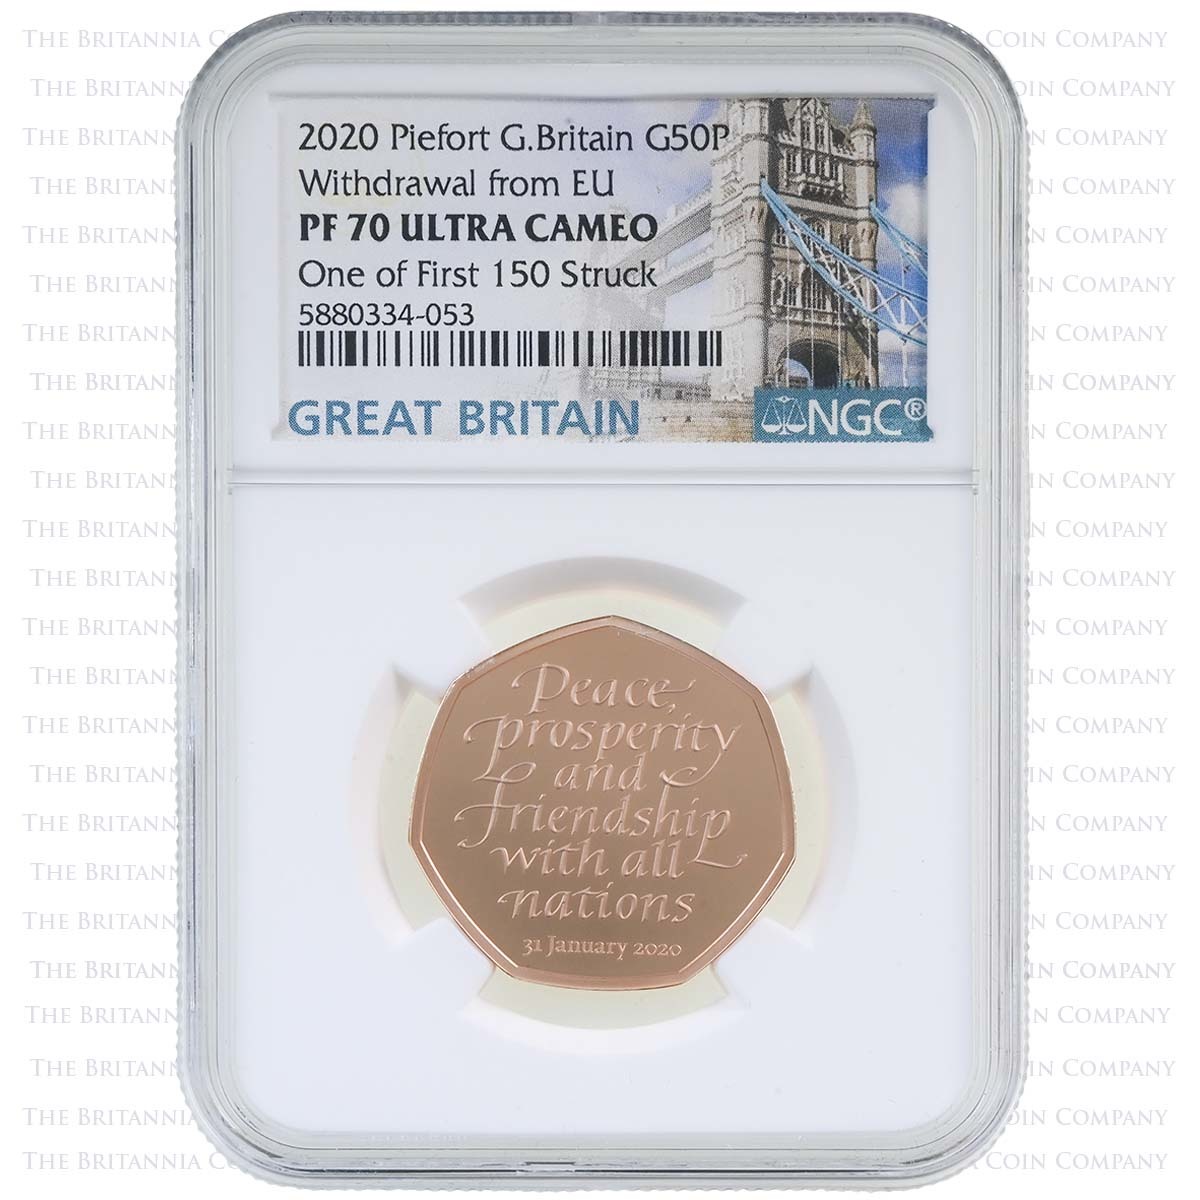 UK20BWGP-PF70 2020 Brexit 50p Piedfort Gold Proof PF 70 Ultra Cameo First 150 Holder